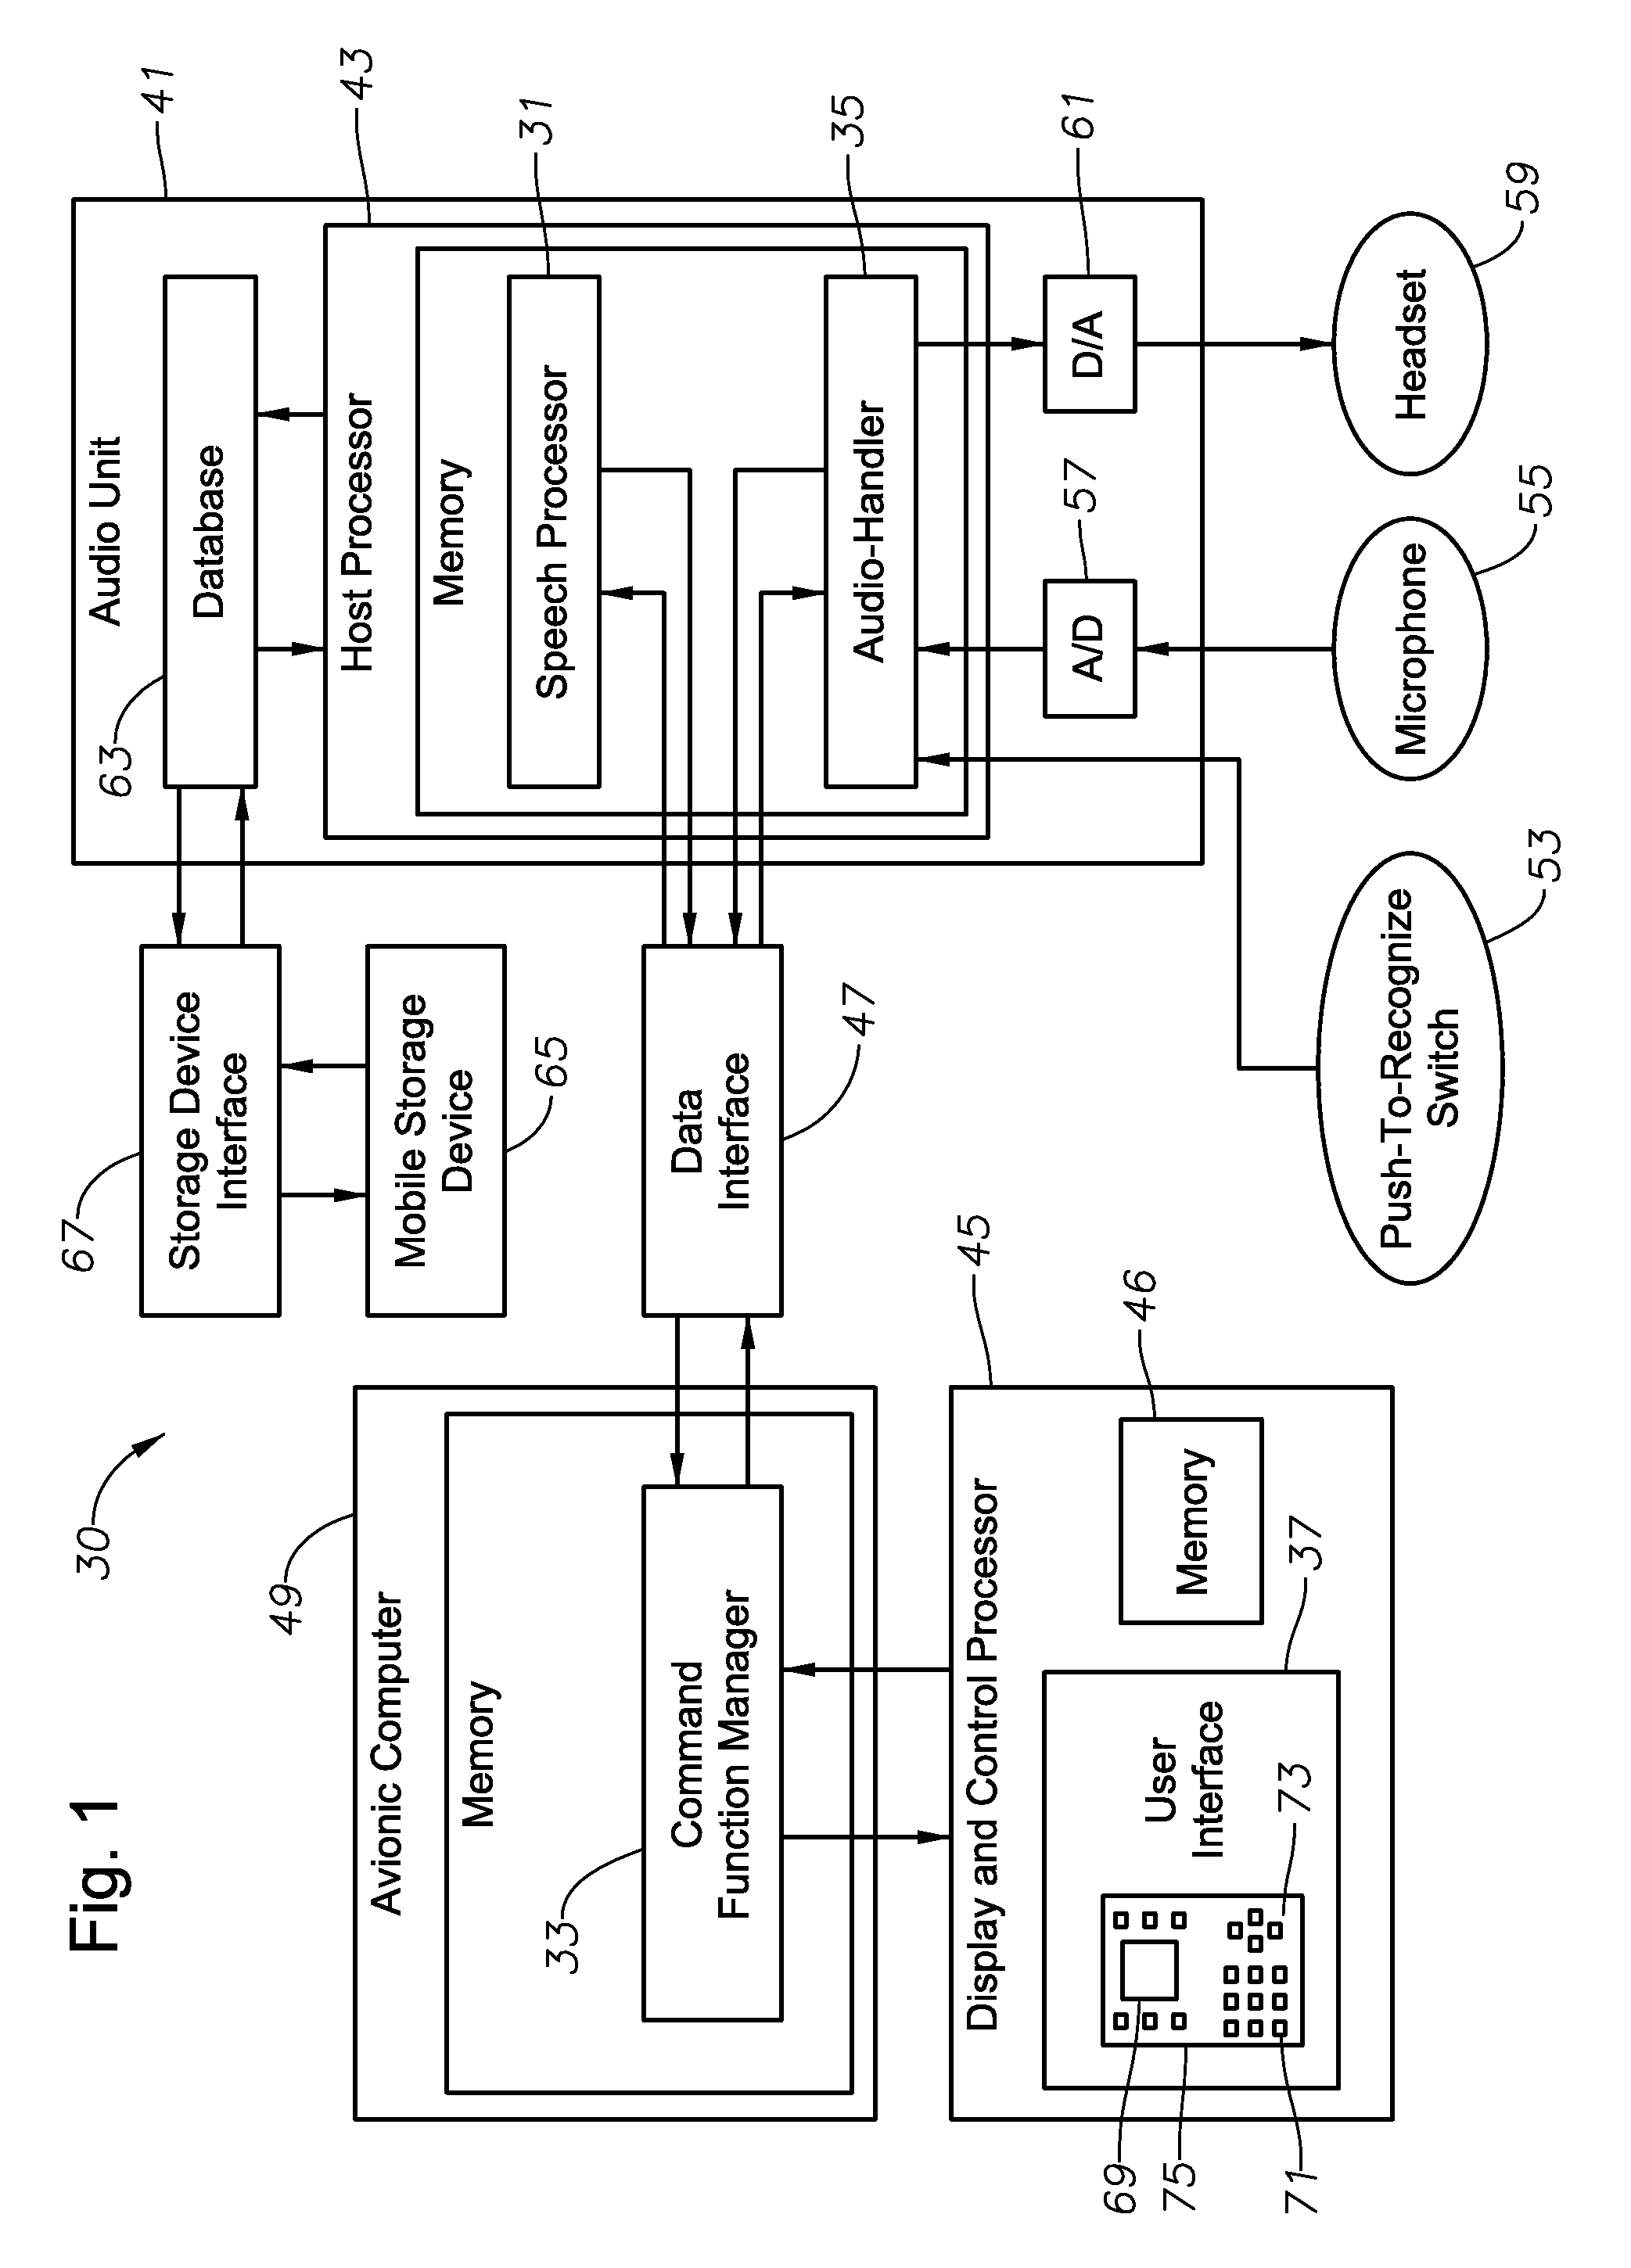 Speech activated control system and related methods